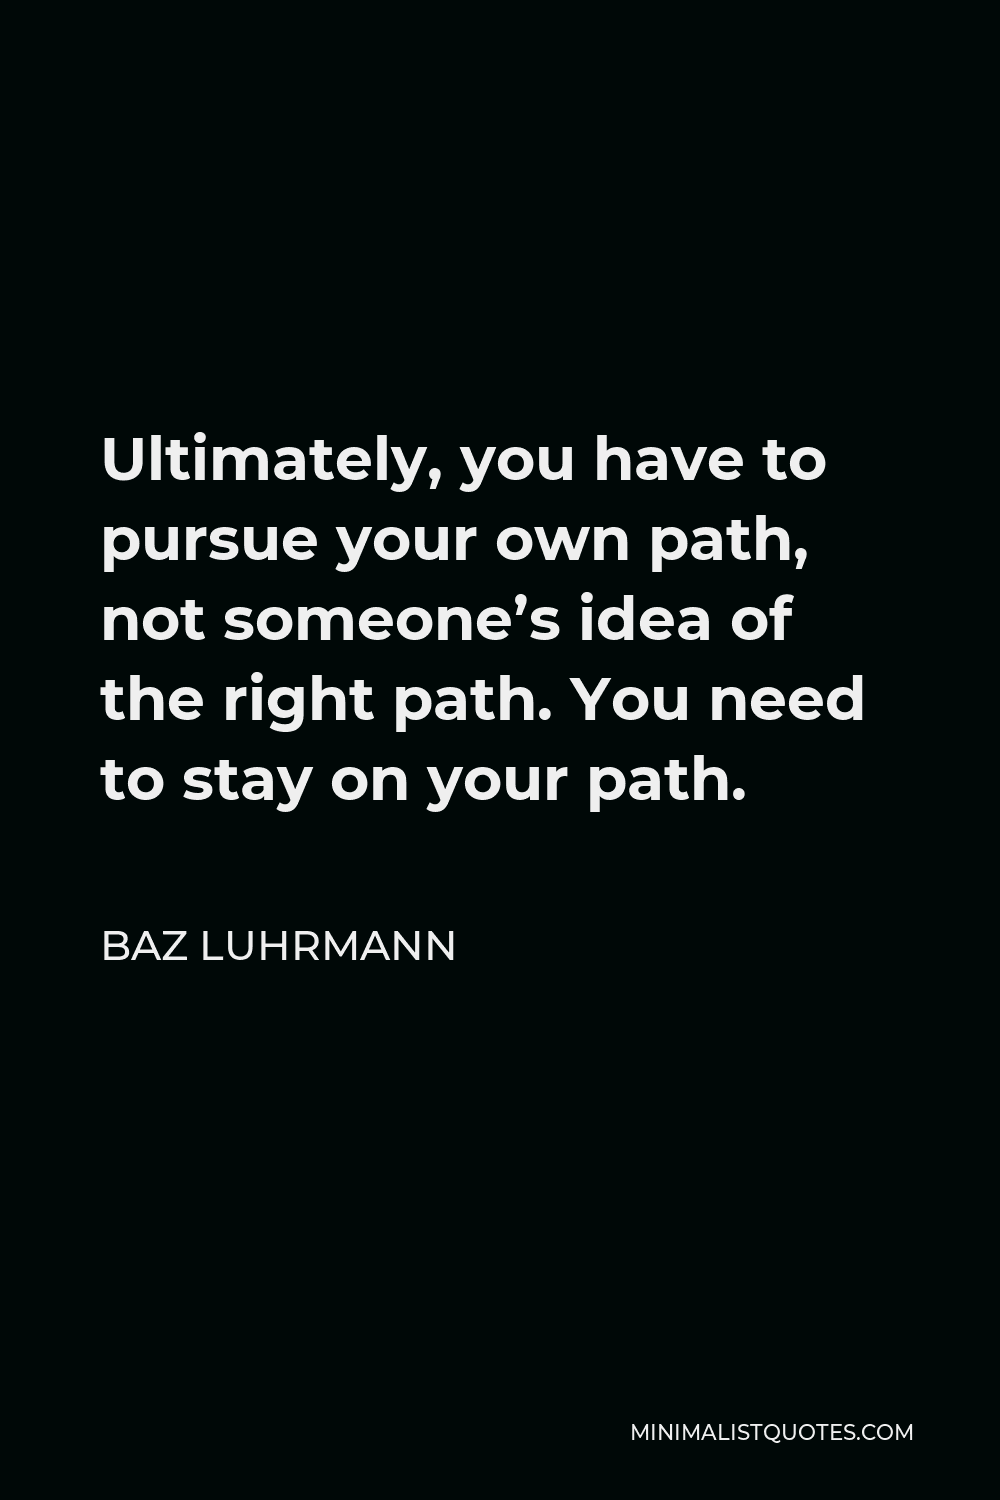 Baz Luhrmann Quote - Ultimately, you have to pursue your own path, not someone’s idea of the right path. You need to stay on your path.